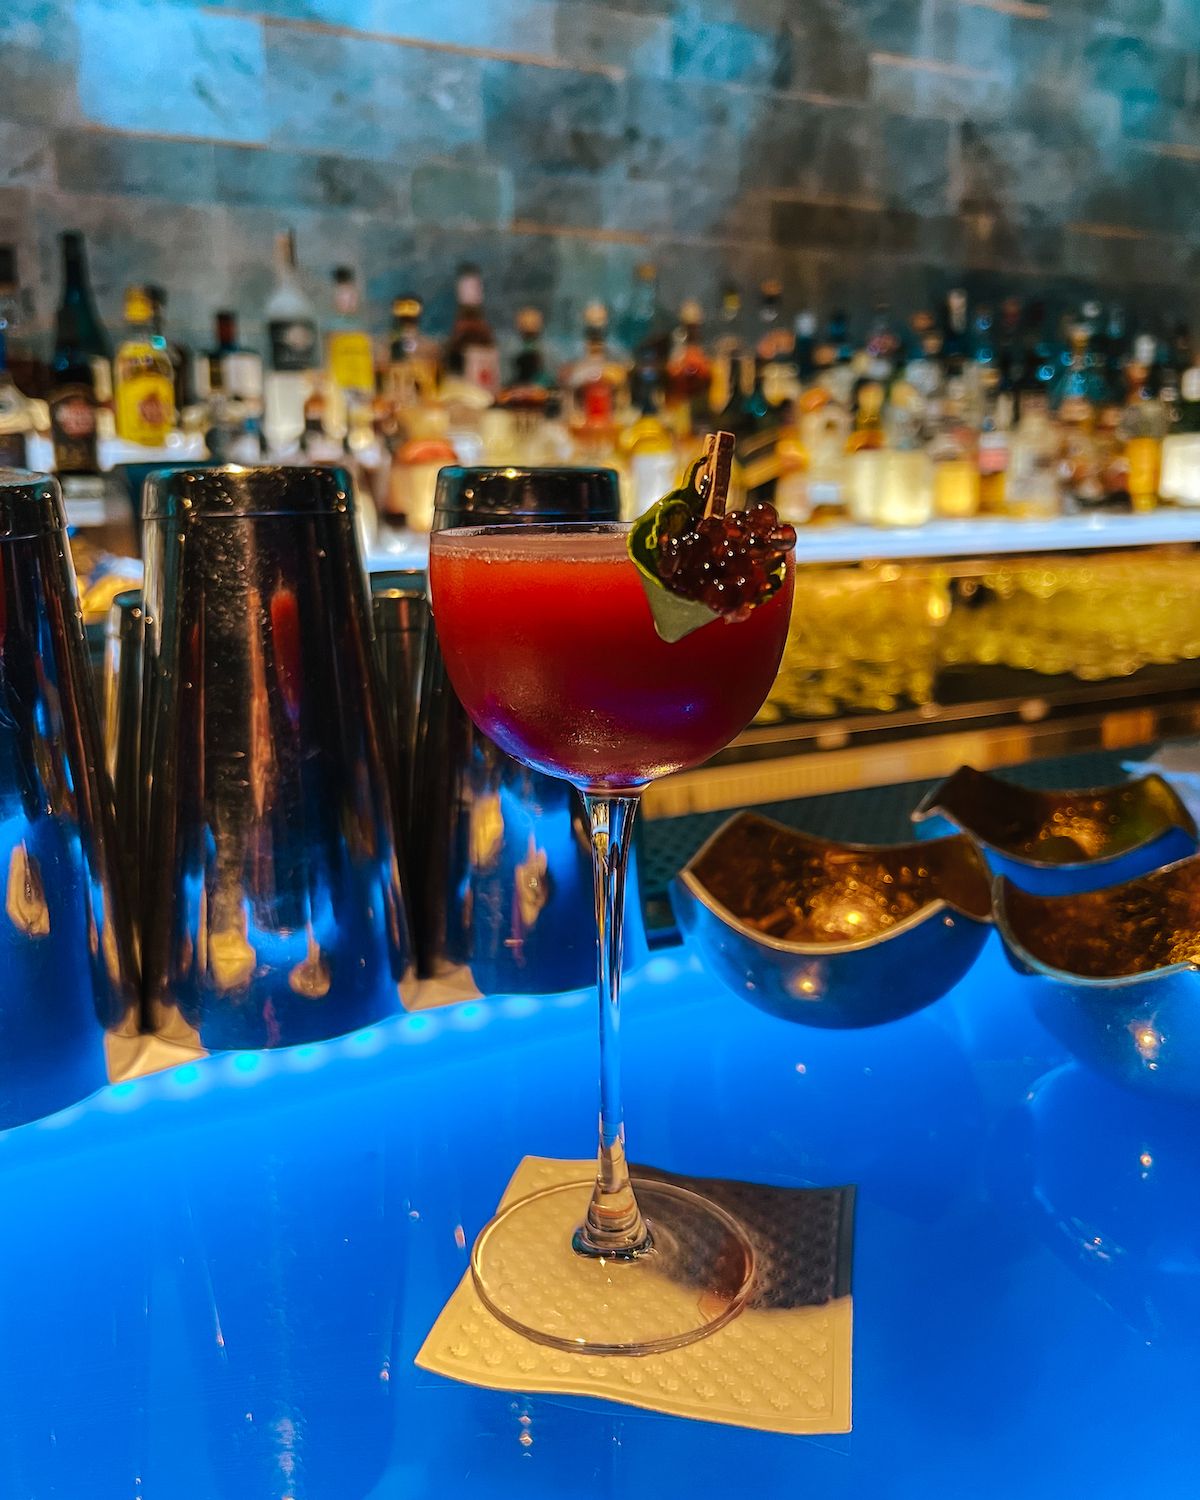 Red cocktail in a coupe glass on a blue bar table